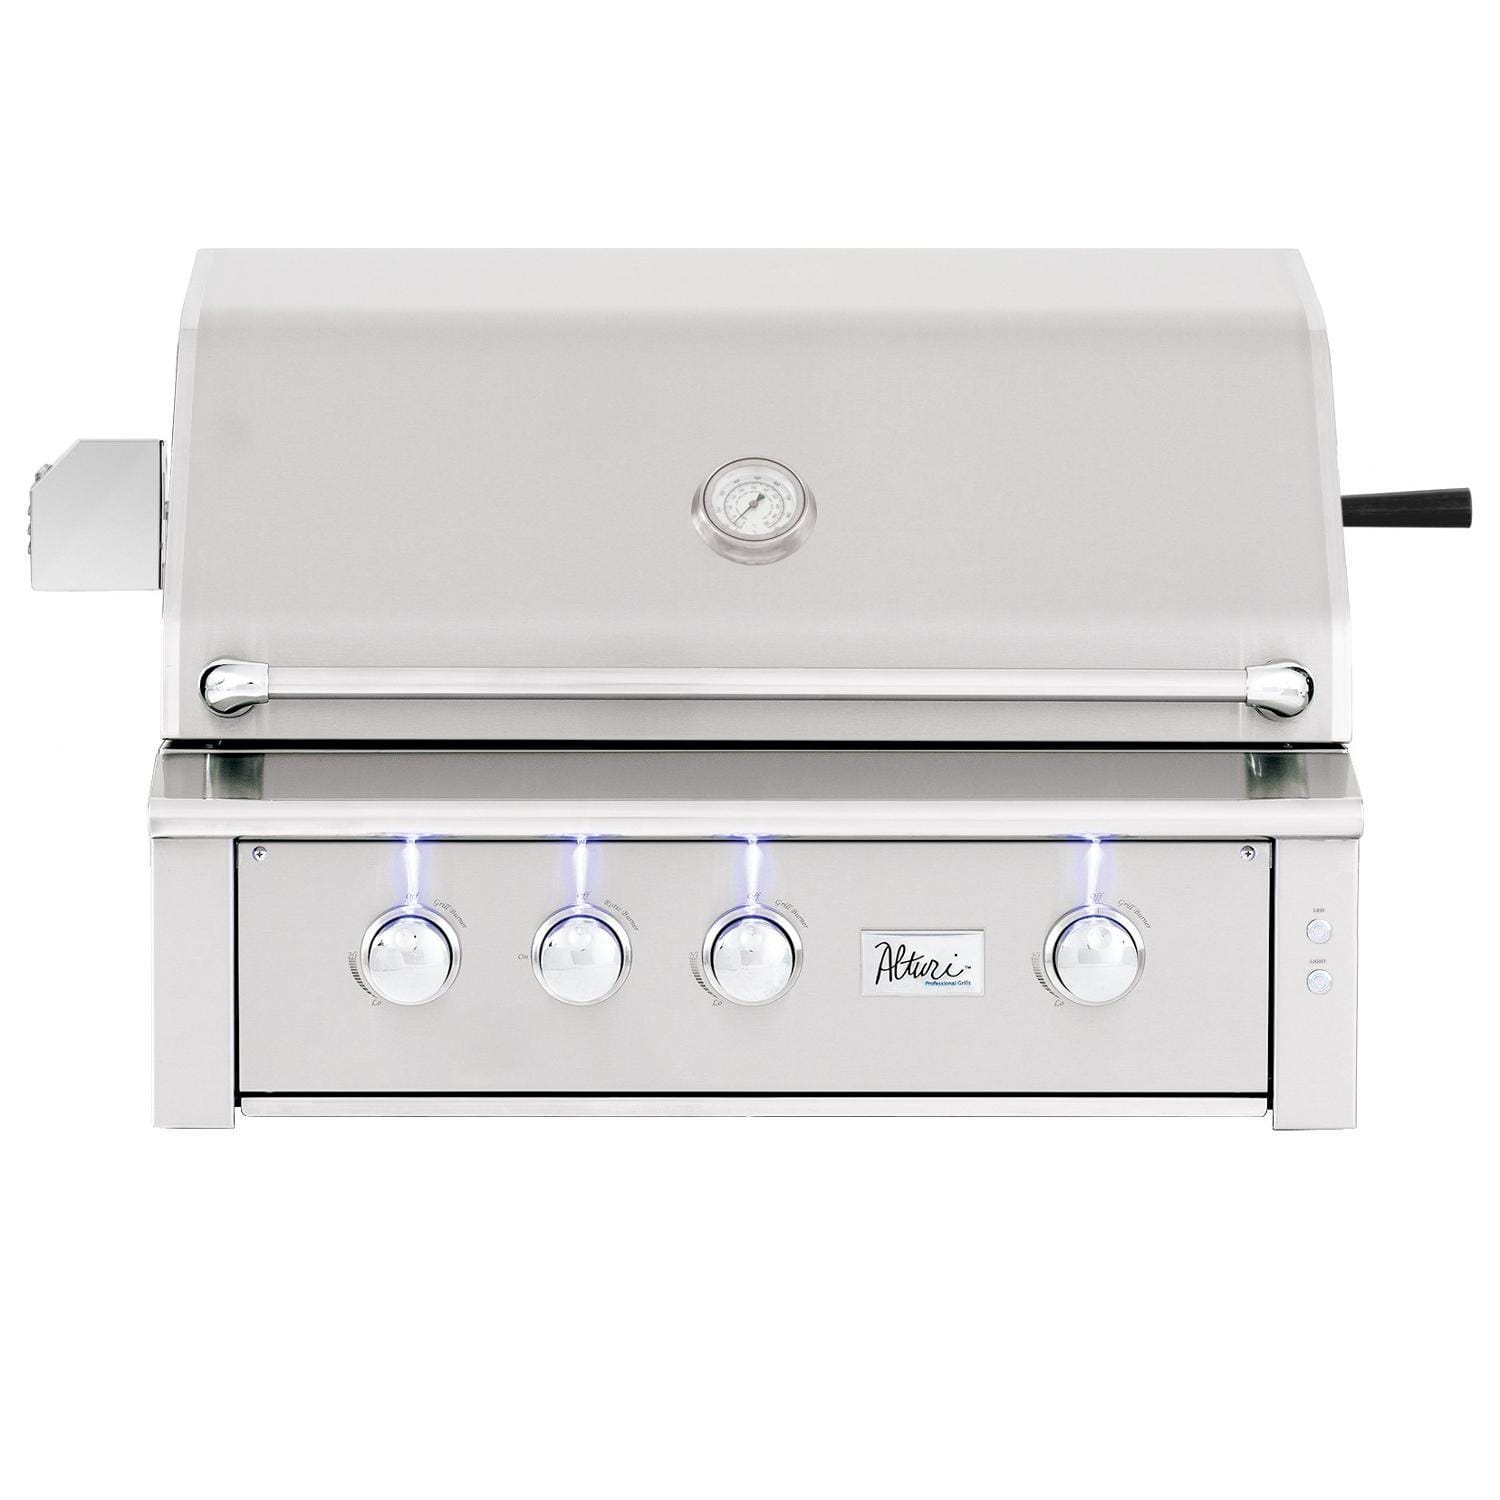 Summerset Grills Grills Propane Alturi Grill, 36" LP/NG  - Built-in with Stainless Steel Main Burners